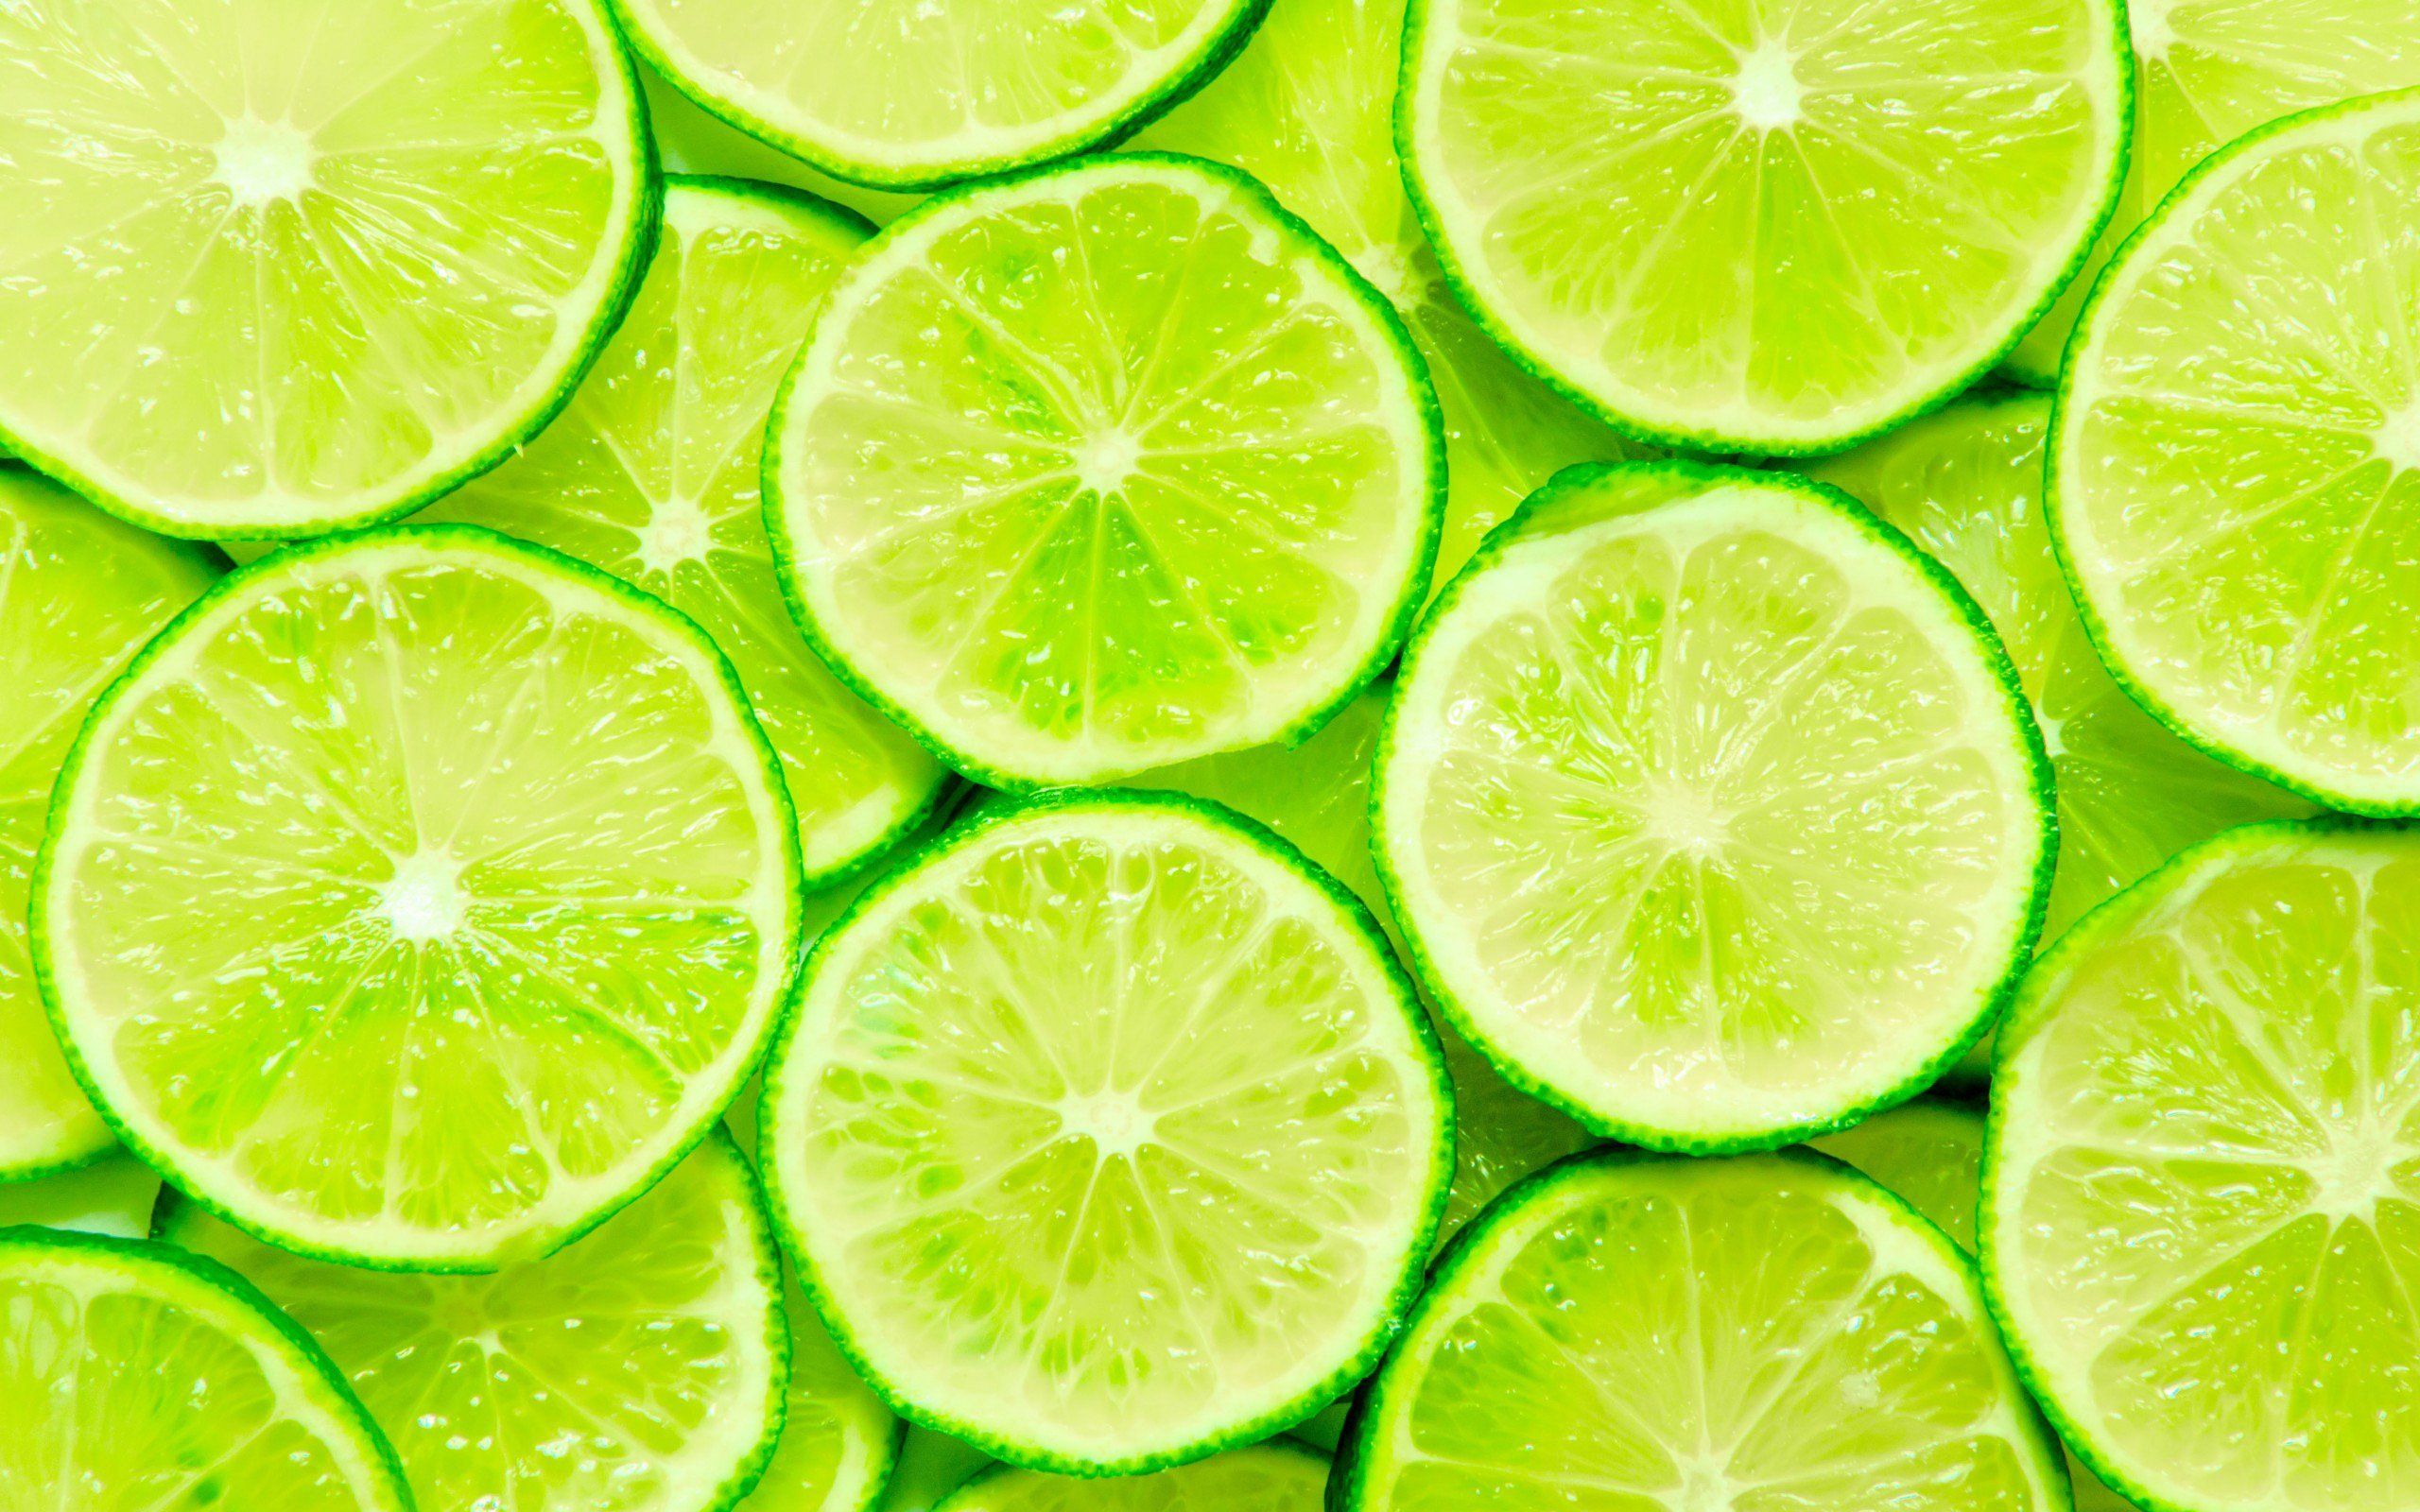 Download wallpaper limes, green lemons, lemon wedges, tropical fruits, lemons, fruits, lemon textures, food textures, background with lemons for desktop with resolution 2560x1600. High Quality HD picture wallpaper. - Lime green